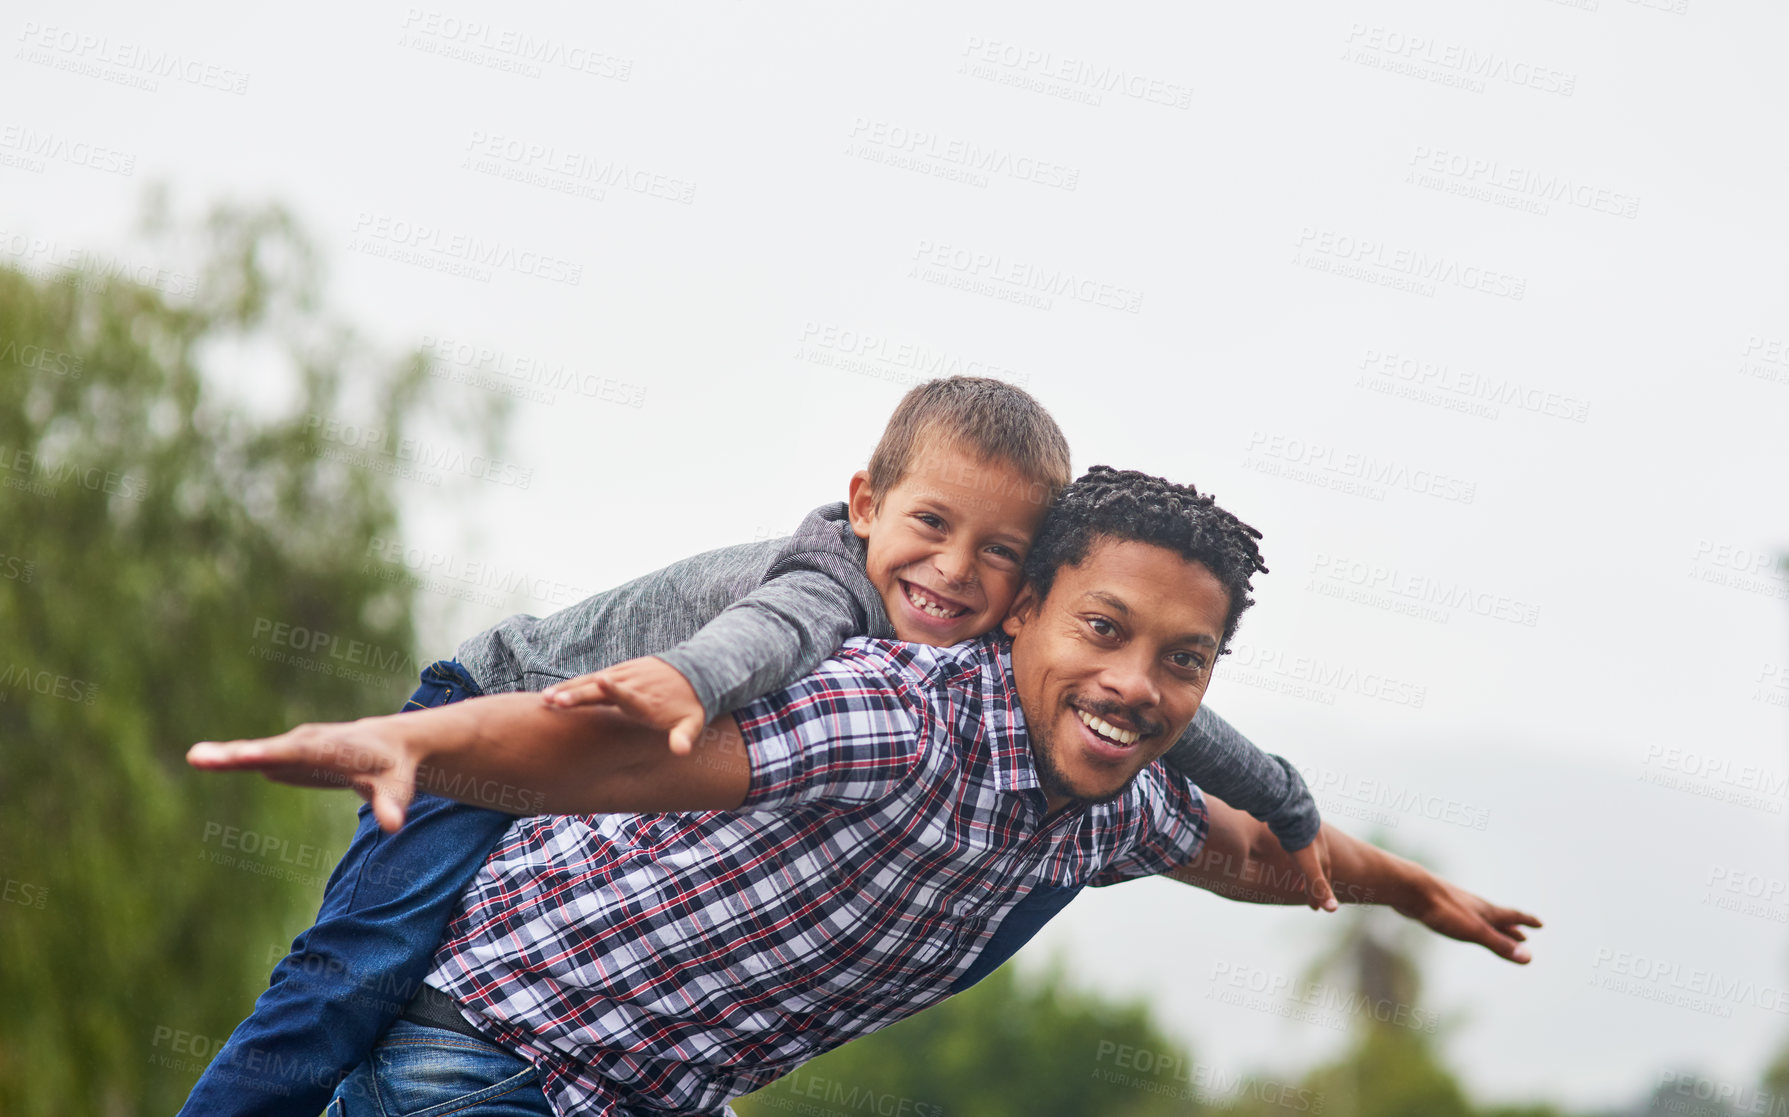 Buy stock photo Portrait of a father and son enjoying a day outside together